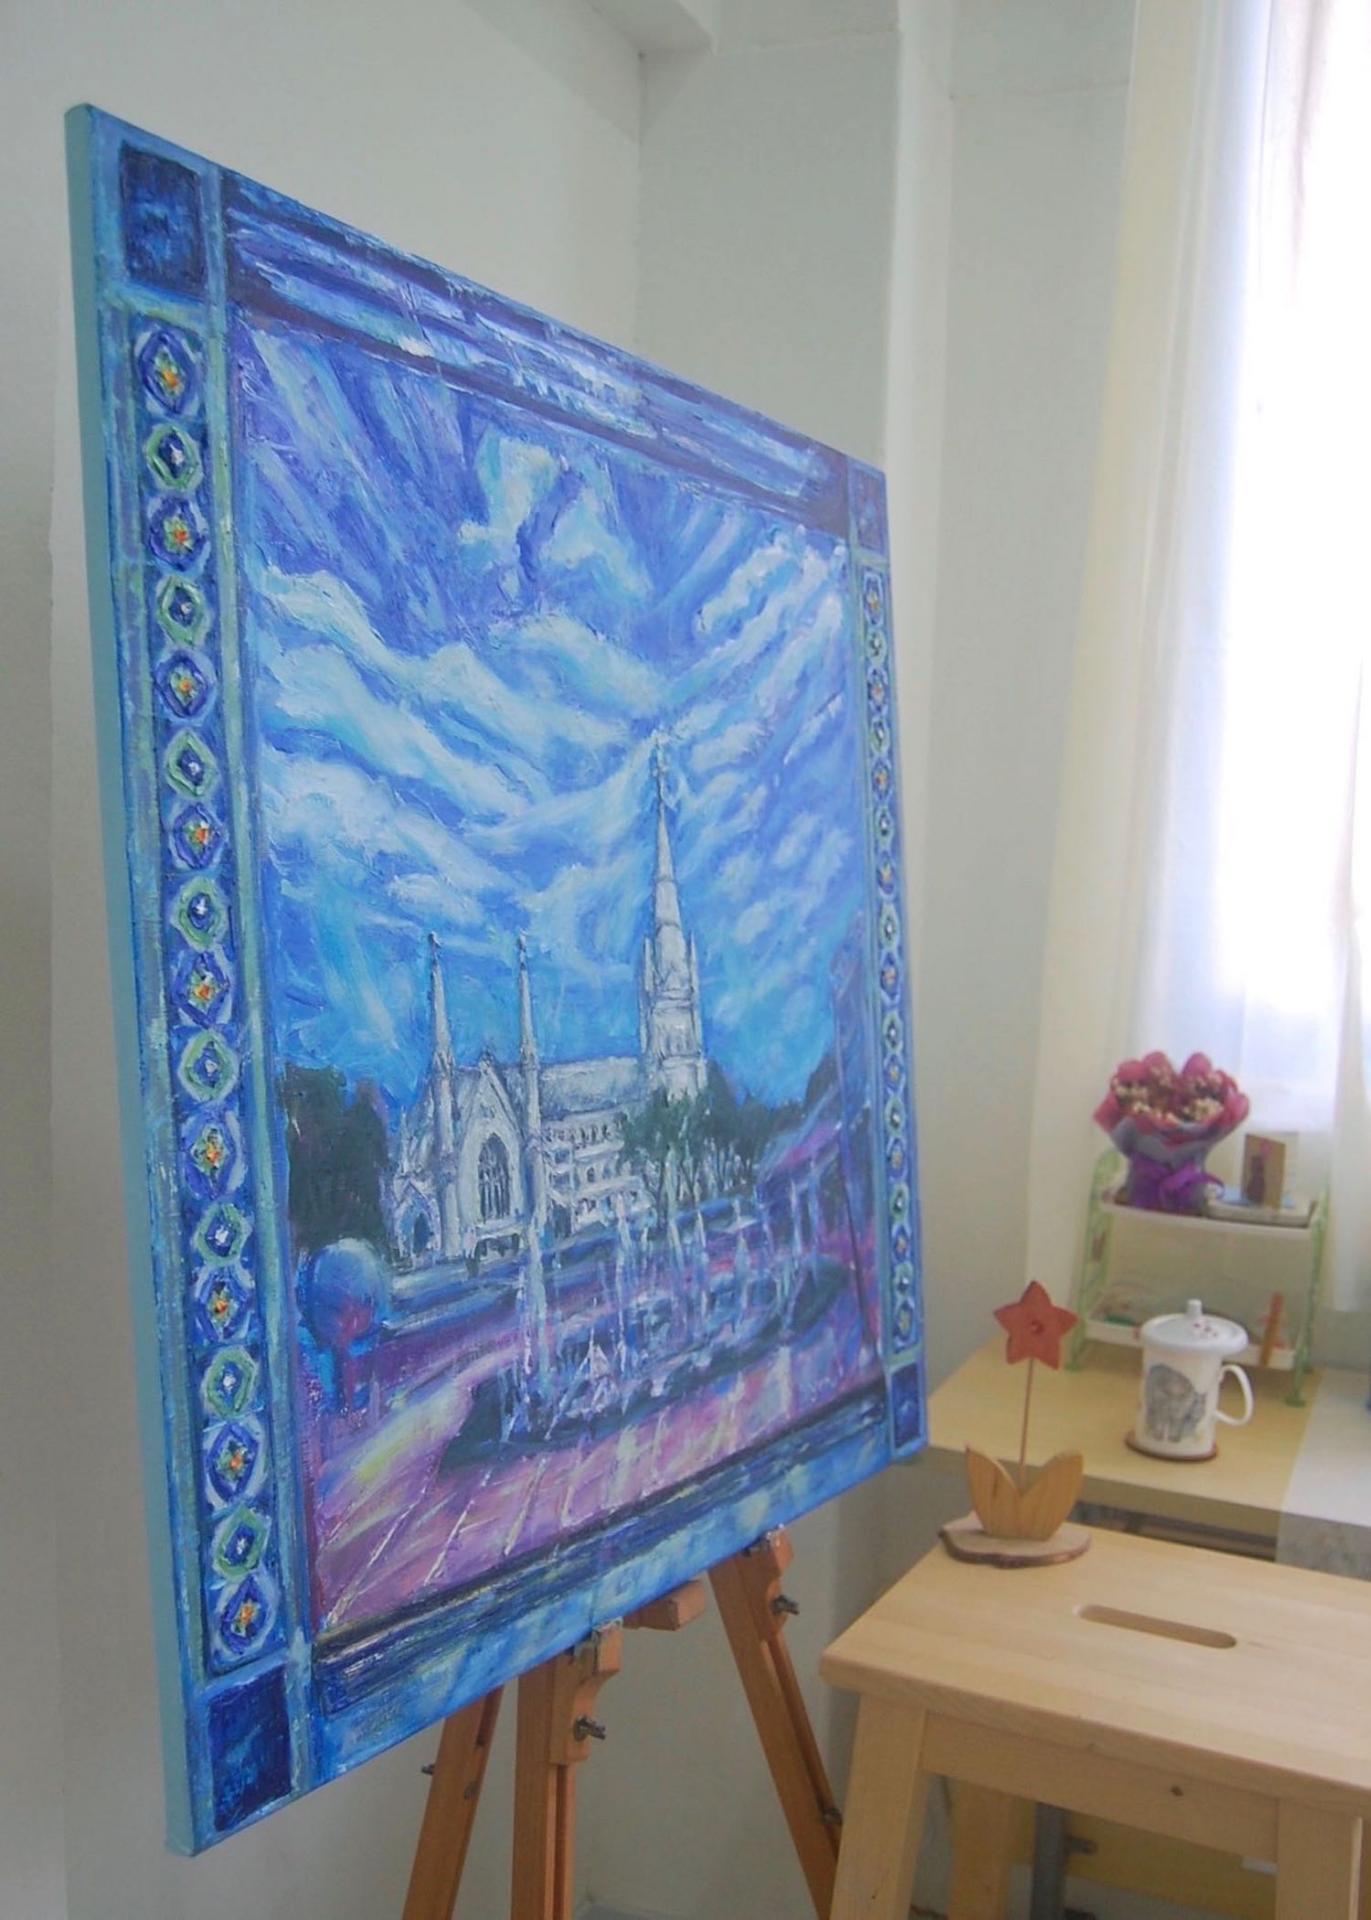 Singapore Impressionist Oil Painting Art, St Andrew's Cathedral church with water fountain, white clouds, blue sky and peranakan tile window